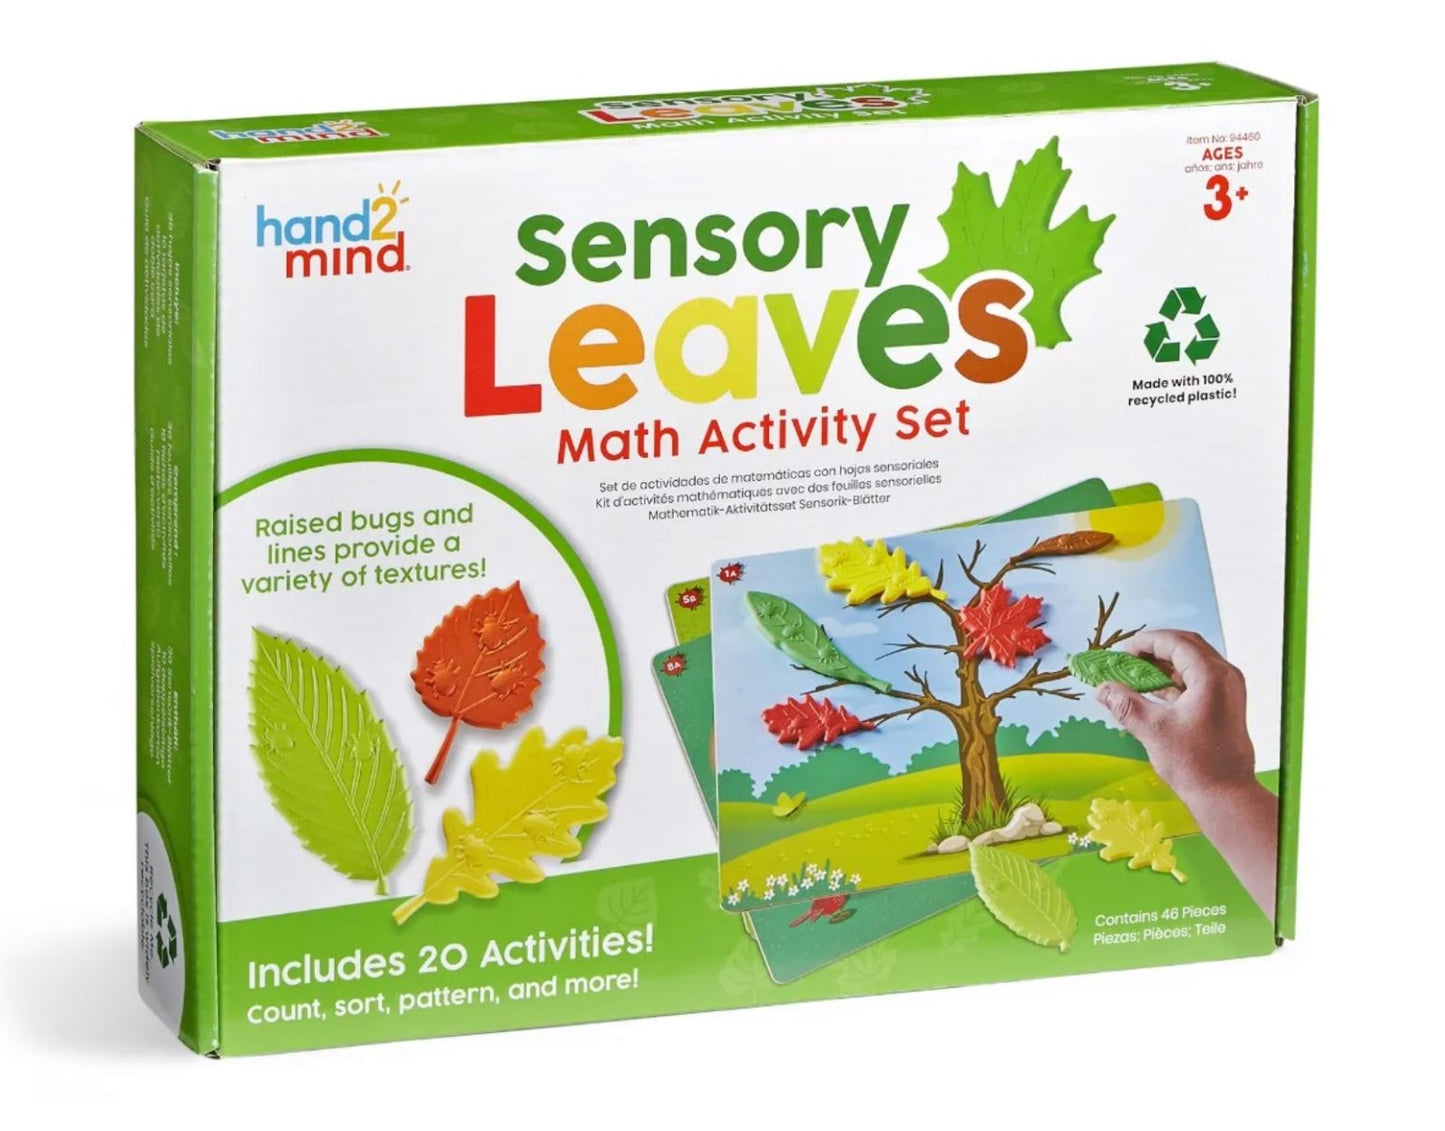 Sensory Leaves Maths Activity Set - Learning Resources